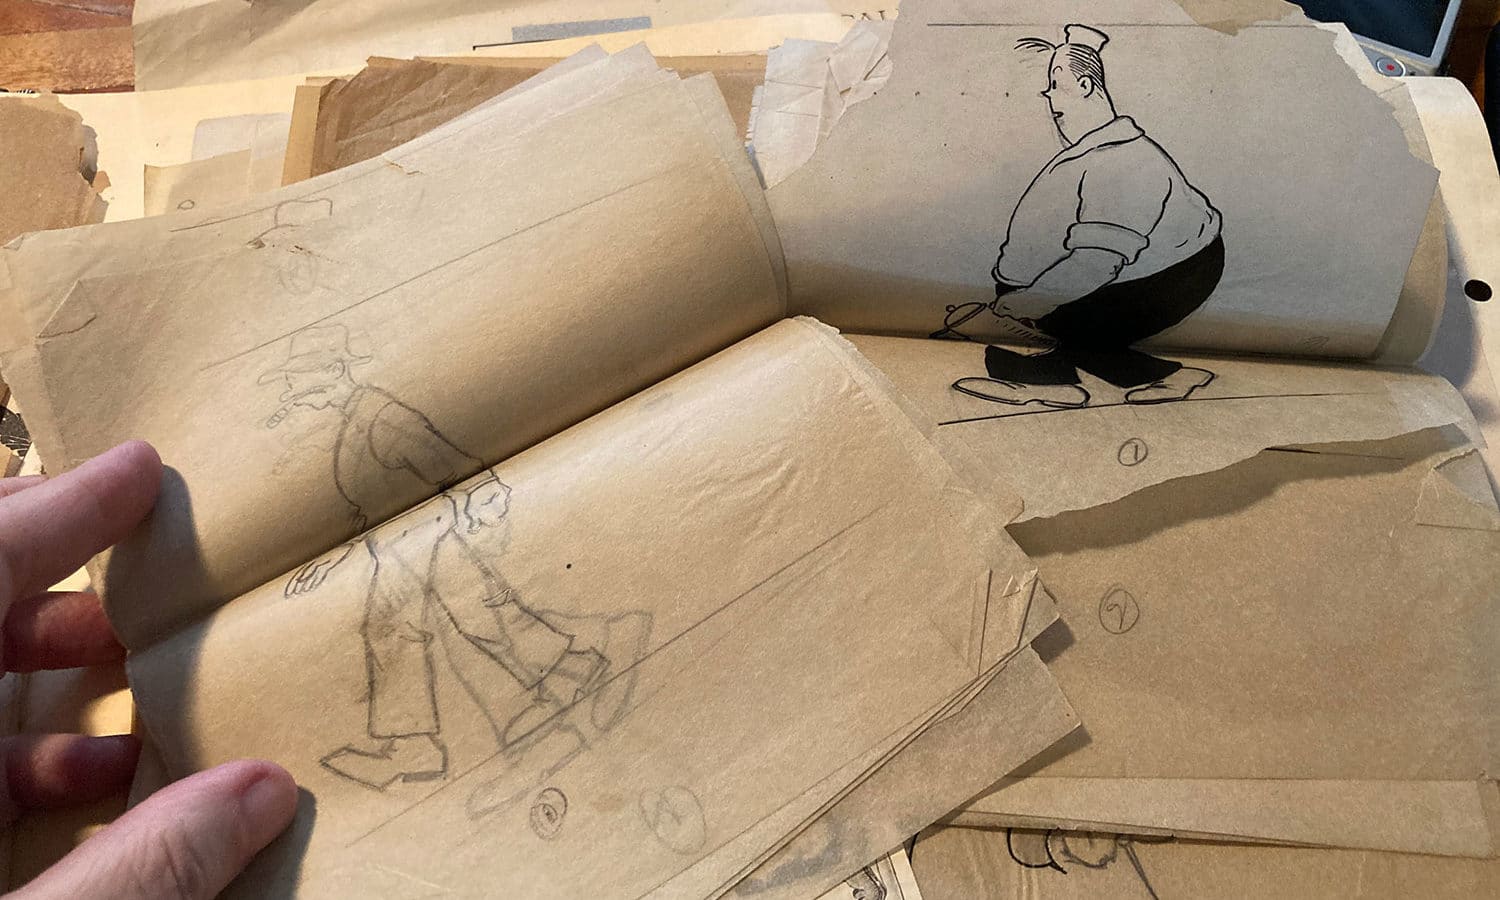 Stacks of papers featuring pencil-drawn walk cycles of two male characters